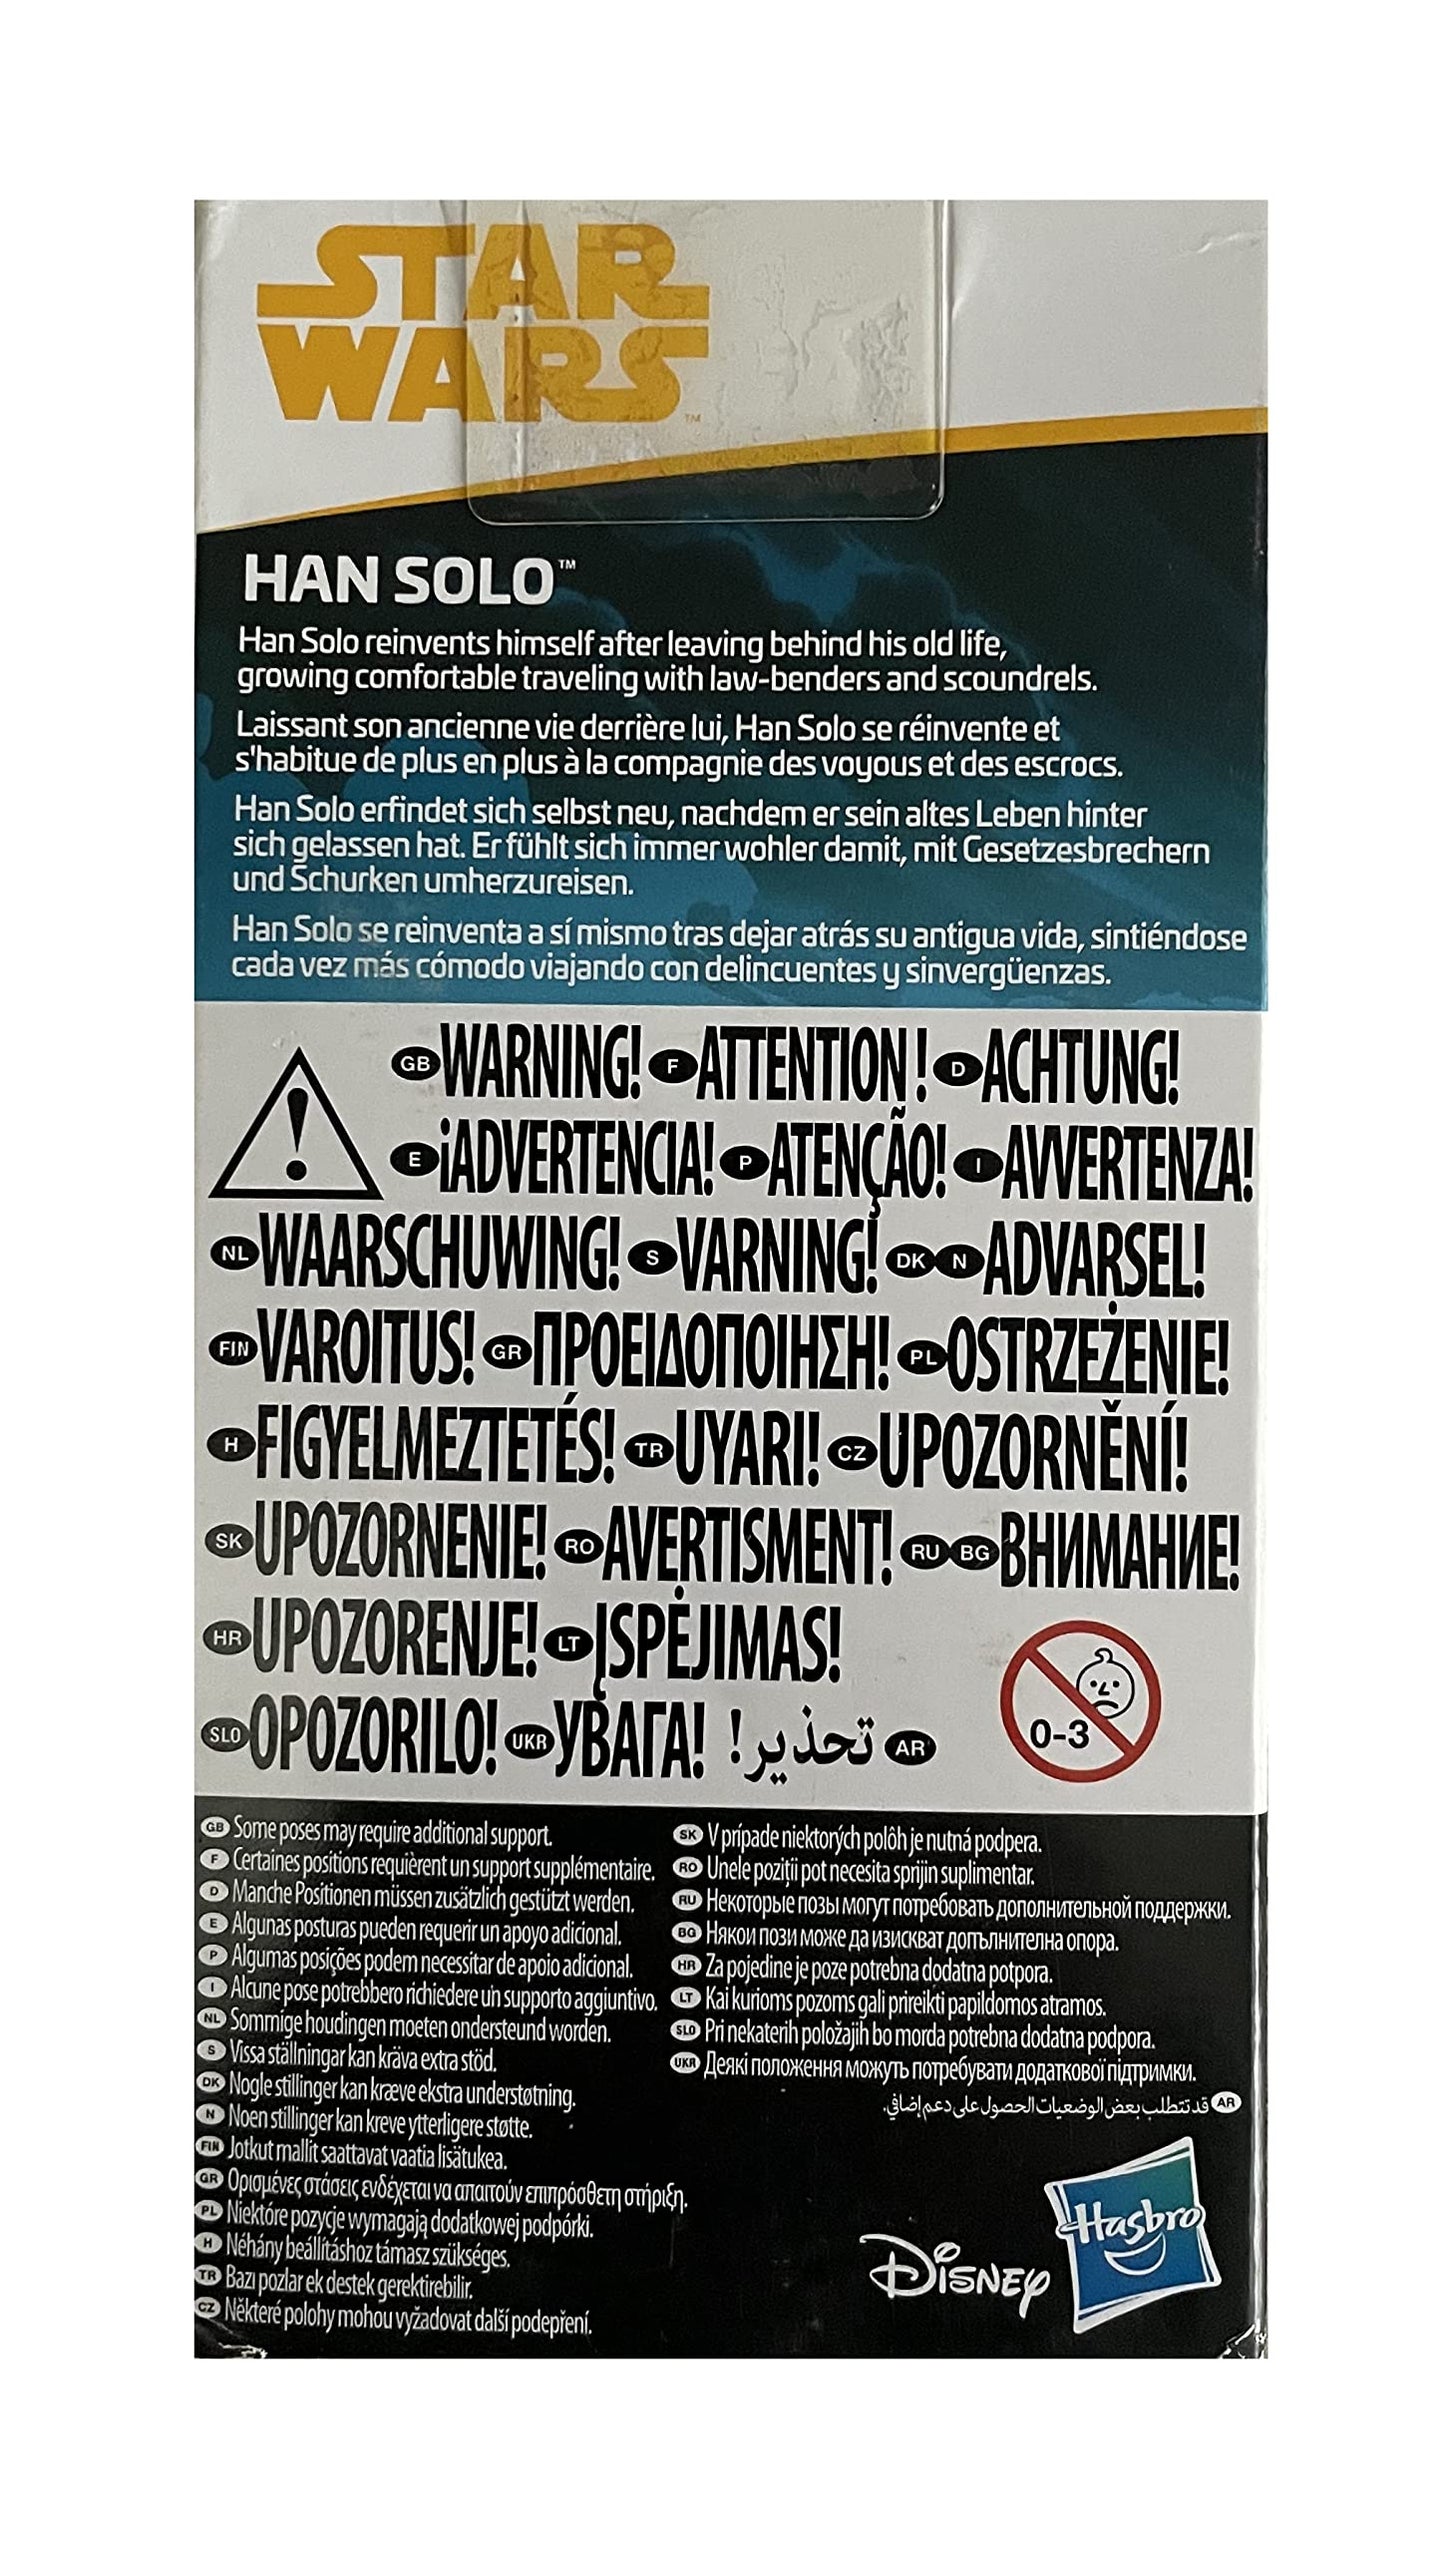 Star Wars 2015 Solo The Movie - Han Solo 6 Inch Action Figure In Window Box - Factory Sealed Shop Stock Room Find